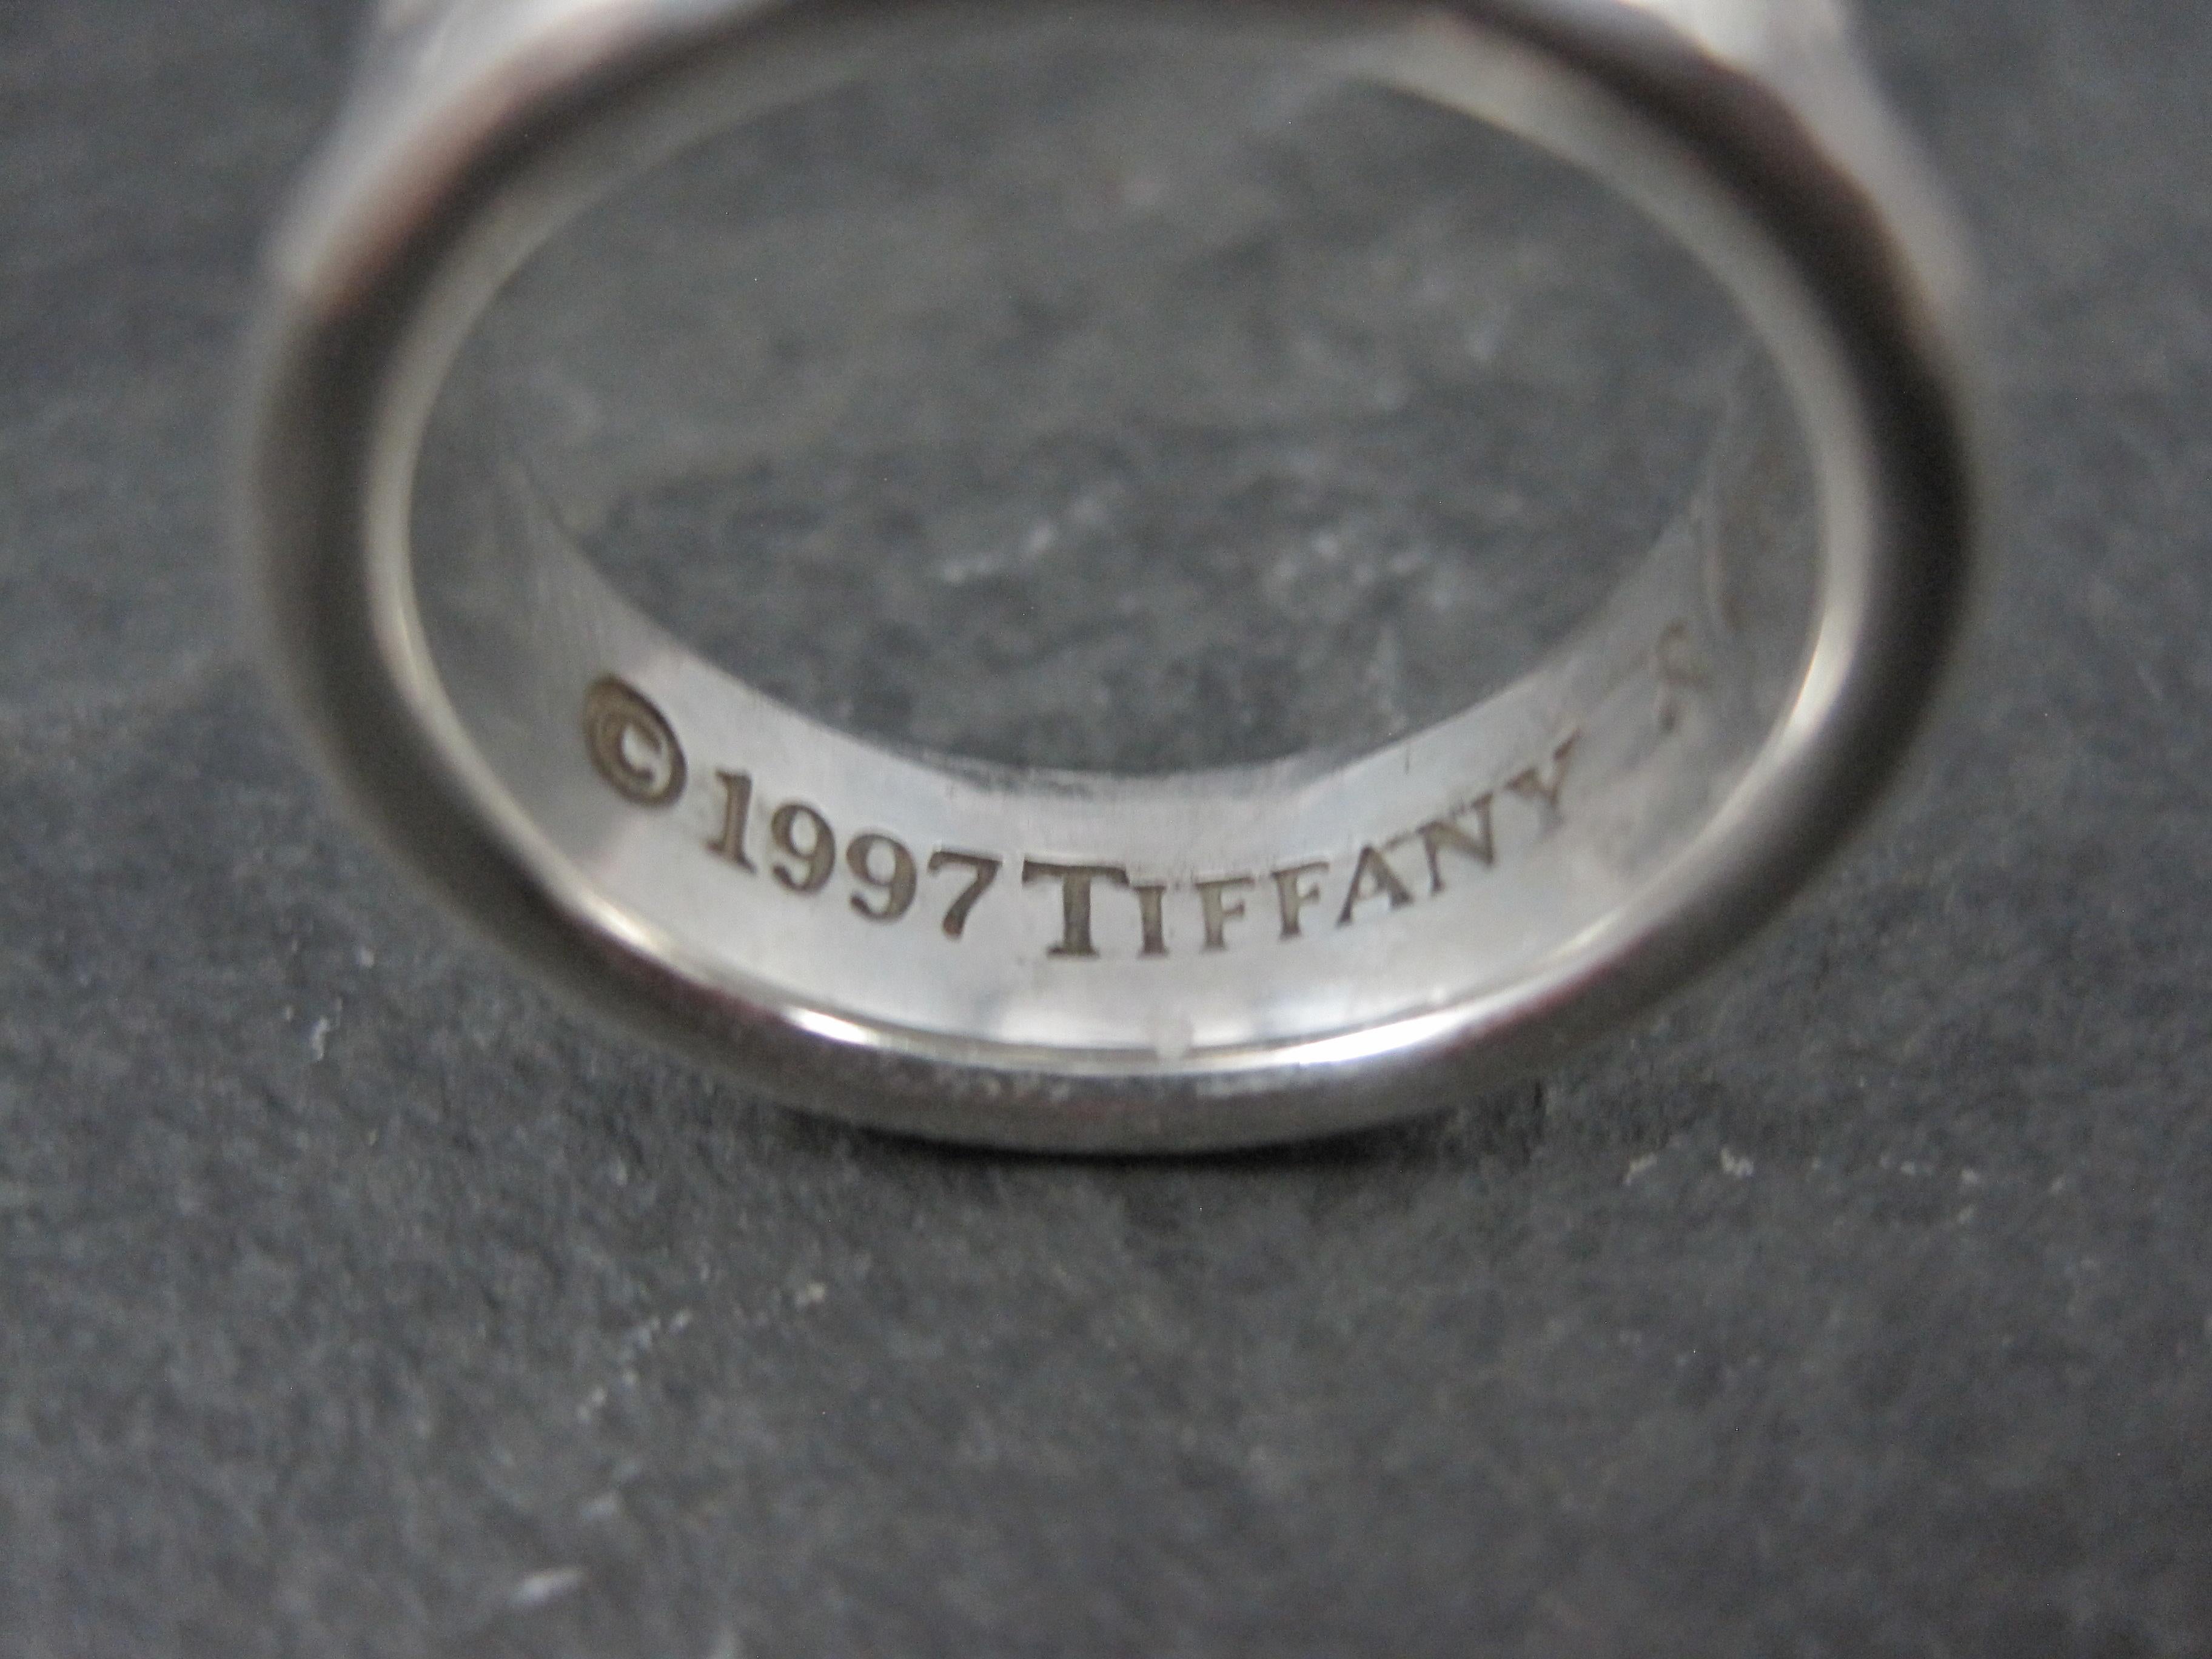 1997 Tiffany & Co 1837 Band Ring Sterling Silver Size 6.5 For Sale 4